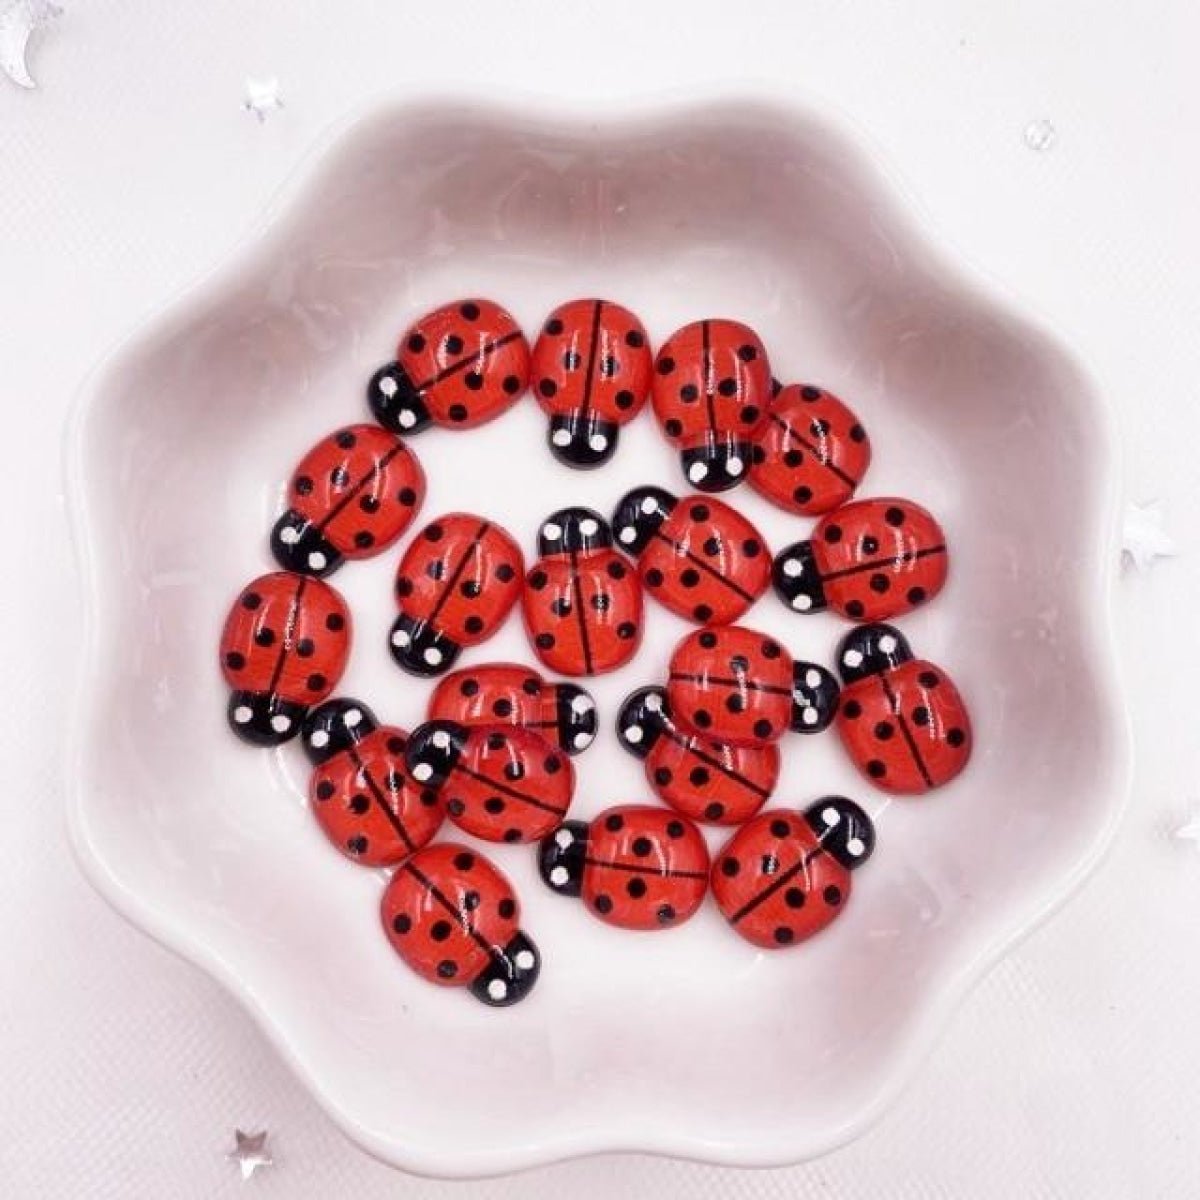 50pcs Bee Resin Flat Back Mini DIY Scrapbooking Crafts Home Decorations Resin Shape - Red - - Asia Sell